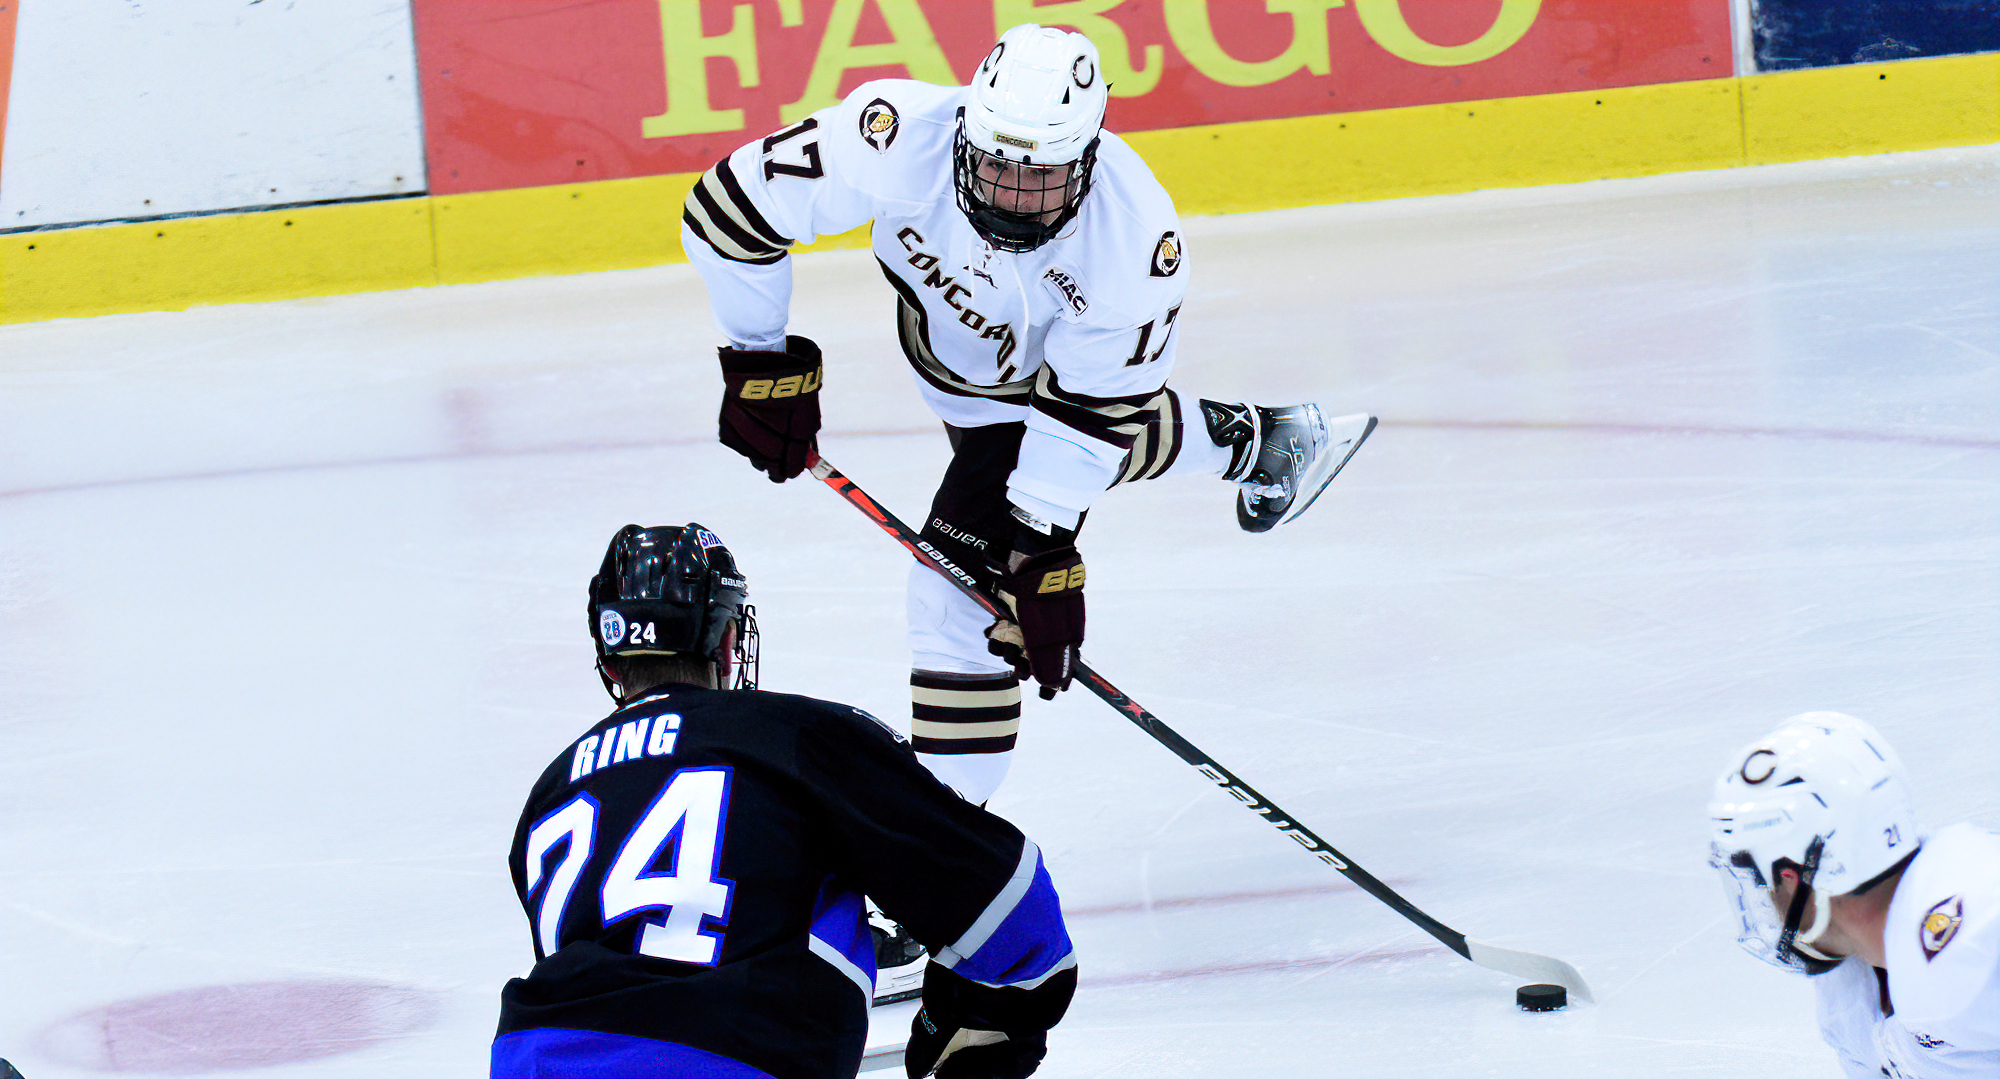 Mason Plante scored two of the three Cobber goals in their series opener at Marian. Plante has four goals in the last two games.